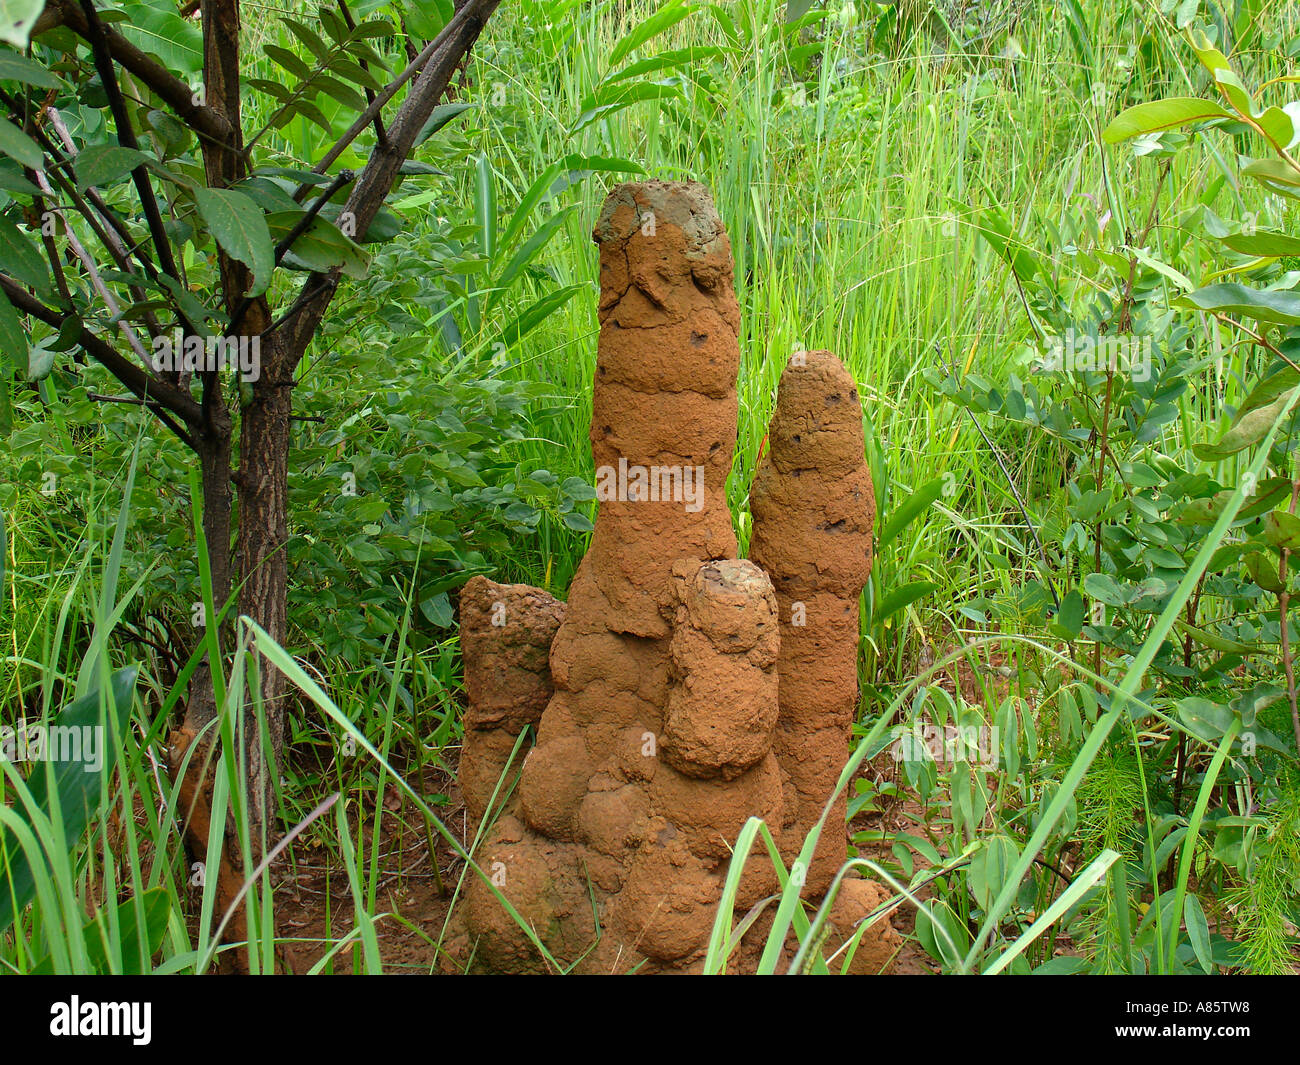 African termite mounds with lush green vegetation in rural area of the Copperbelt province of Zambia, Southern Africa Stock Photo